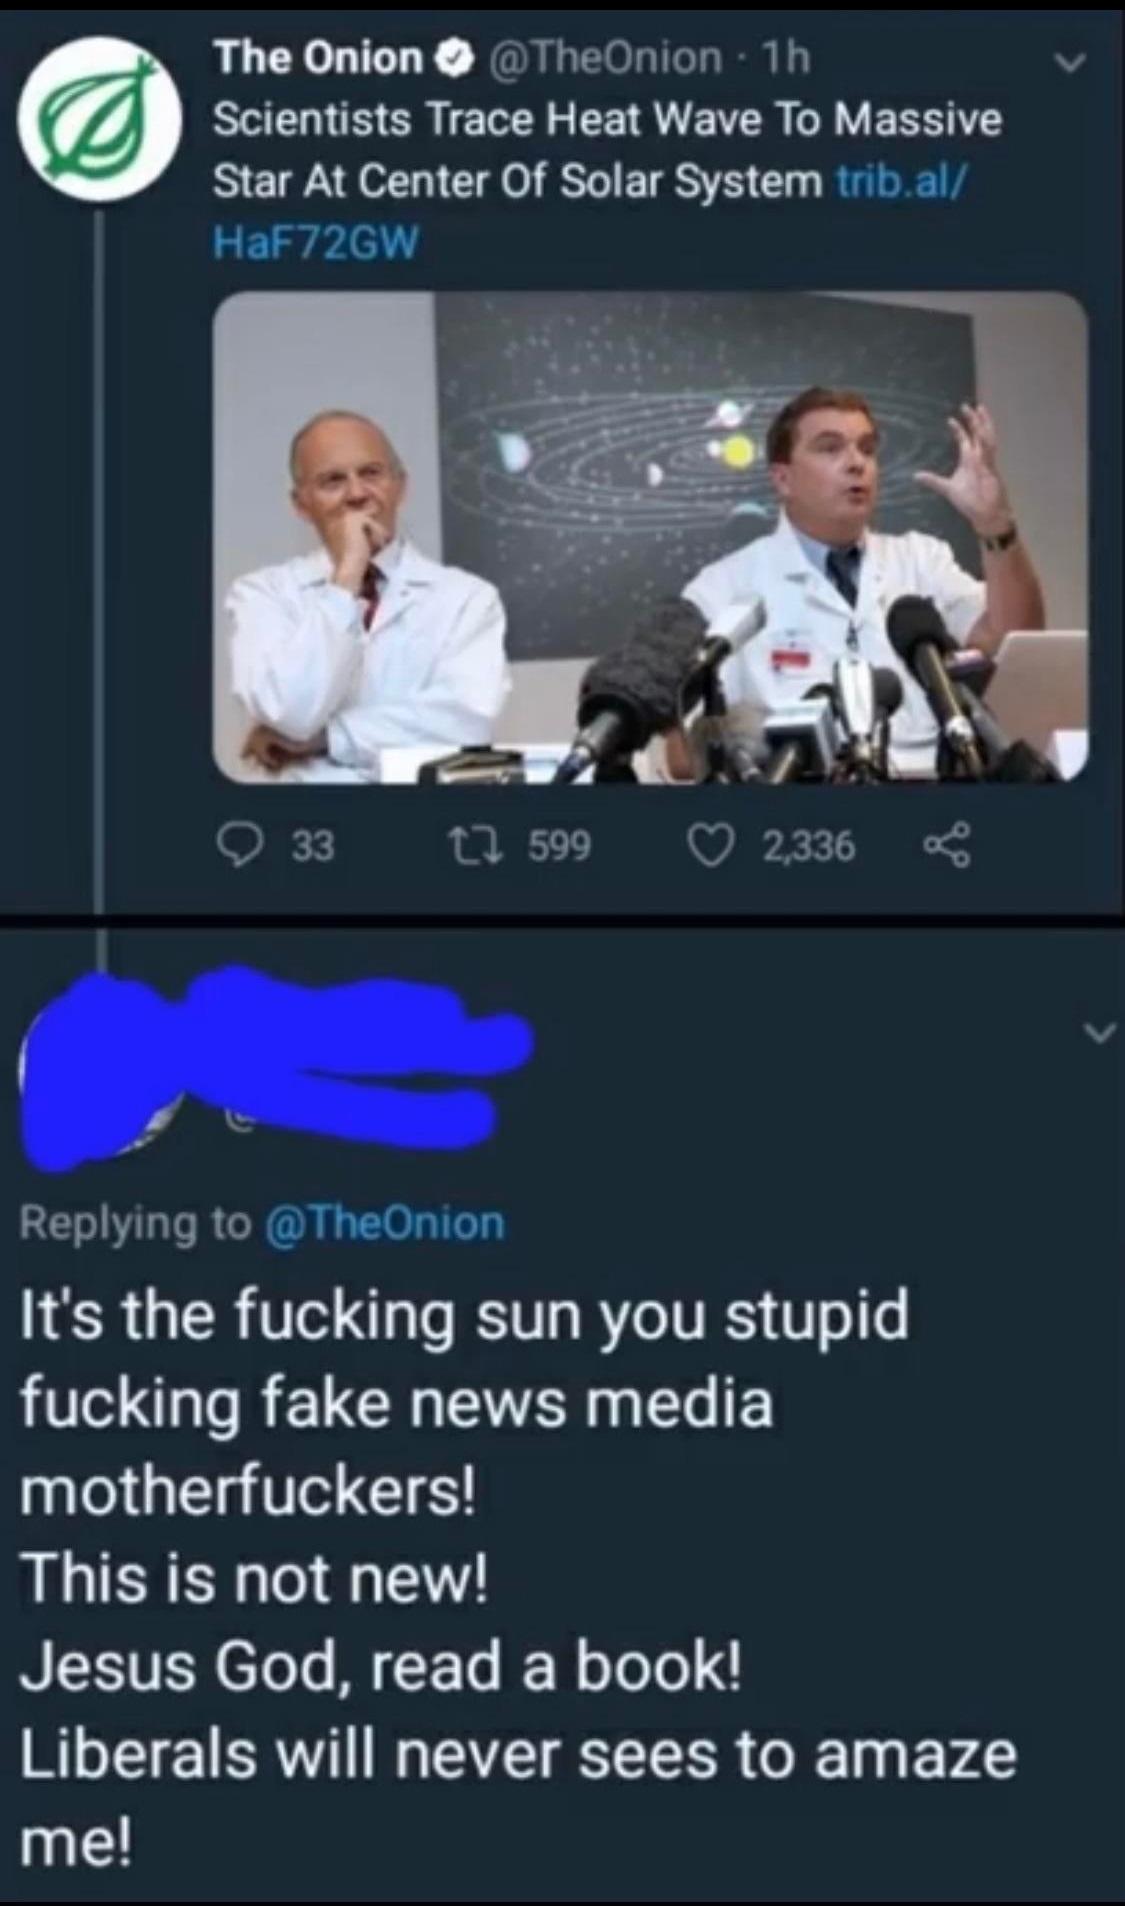 onion scientists meme - The Onion @ The Onion 1h Scientists Trace Heat Wave To Massive Star At Center Of Solar System trib.al HaF72GW O 33 27 599 2,336 as It's the fucking sun you stupid fucking fake news media motherfuckers! This is not new! Jesus God, r